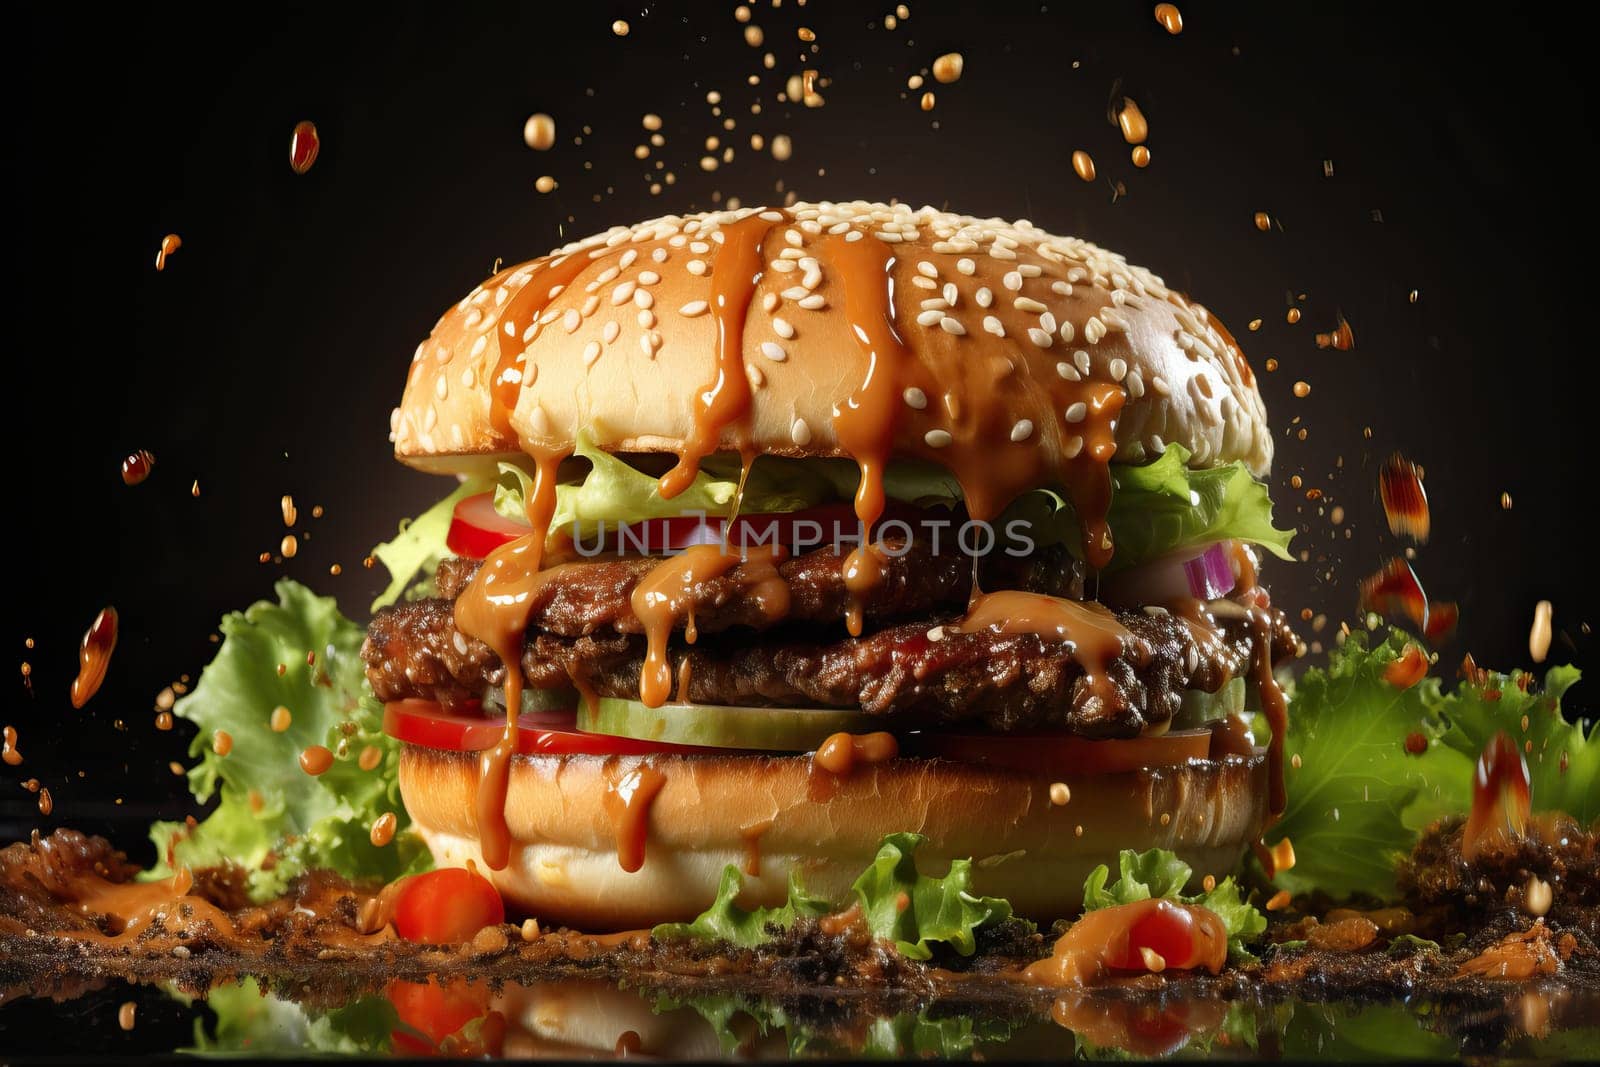 Mega tasty burger on a black background with splashes of sauce, tasty and filling fast food.